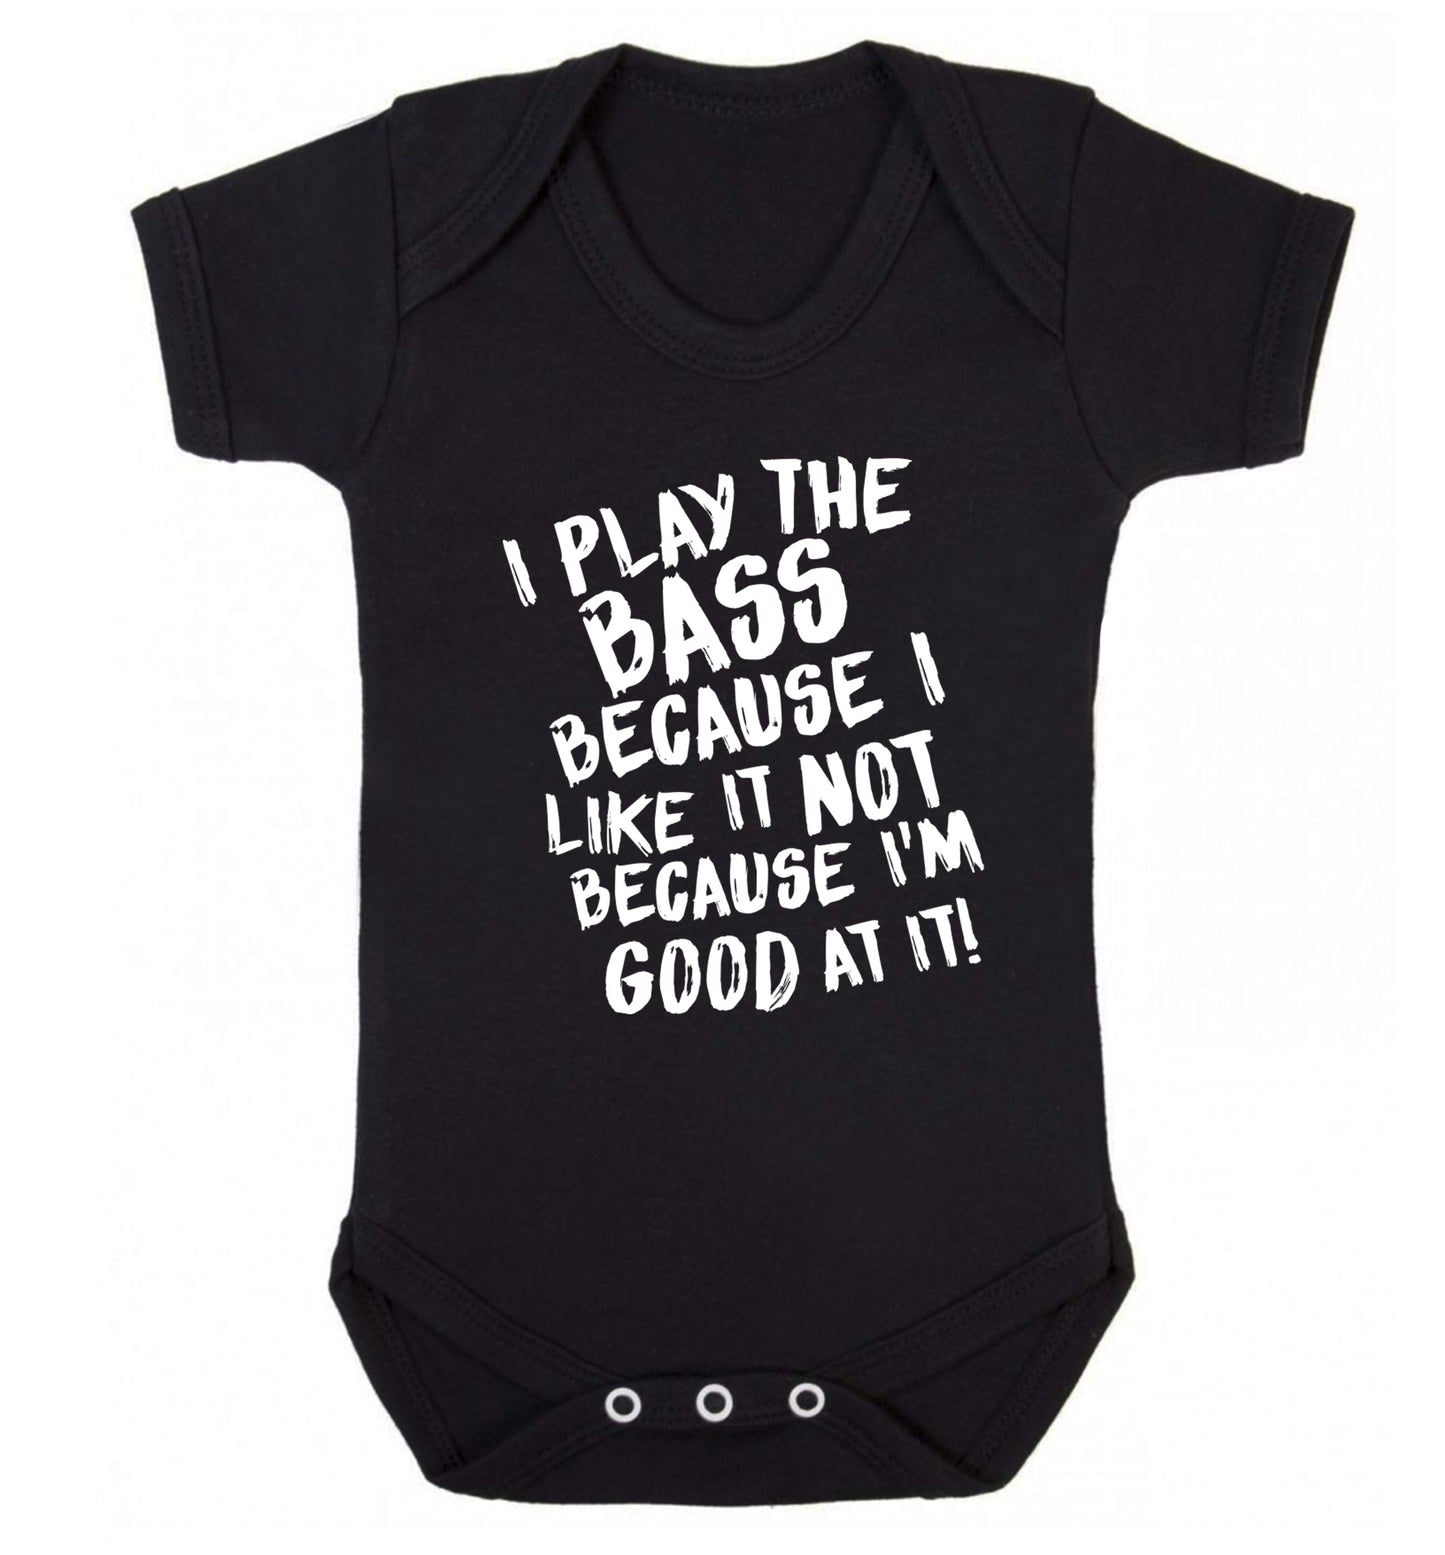 I play the bass because I like it not because I'm good at it Baby Vest black 18-24 months